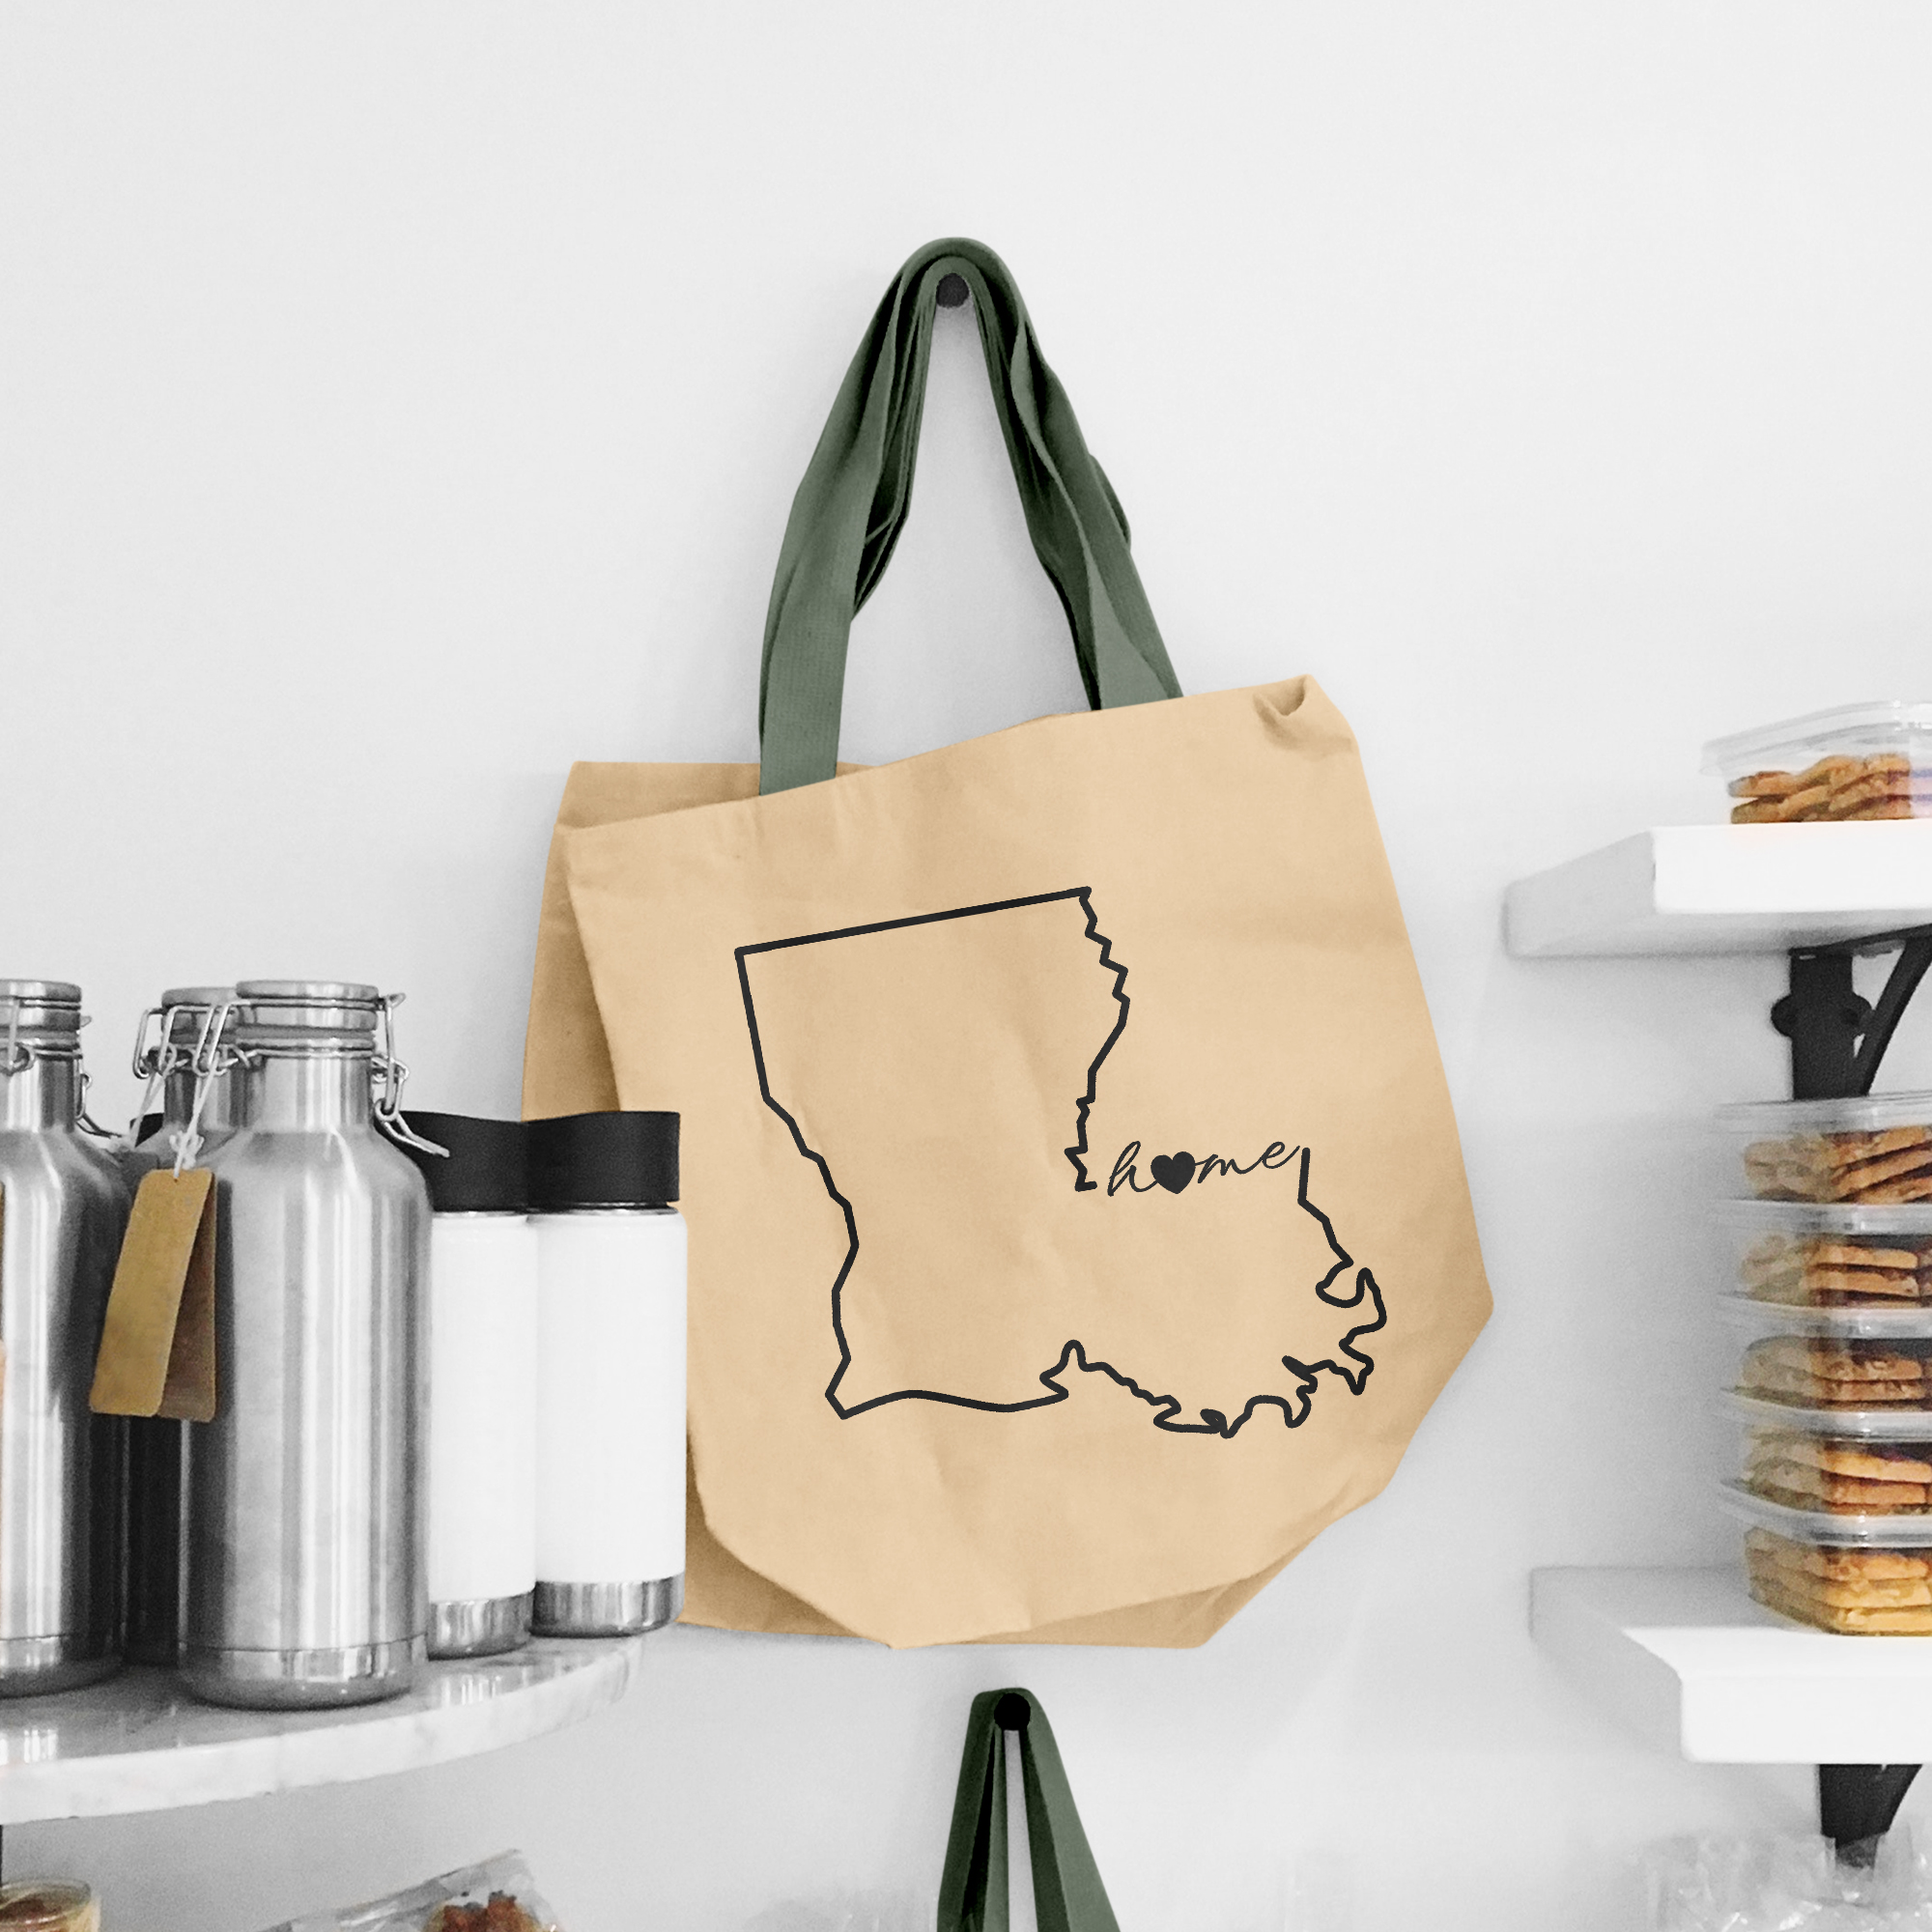 Black illustration of map of Louisiana on the beige shopping bag with dirty green handle.